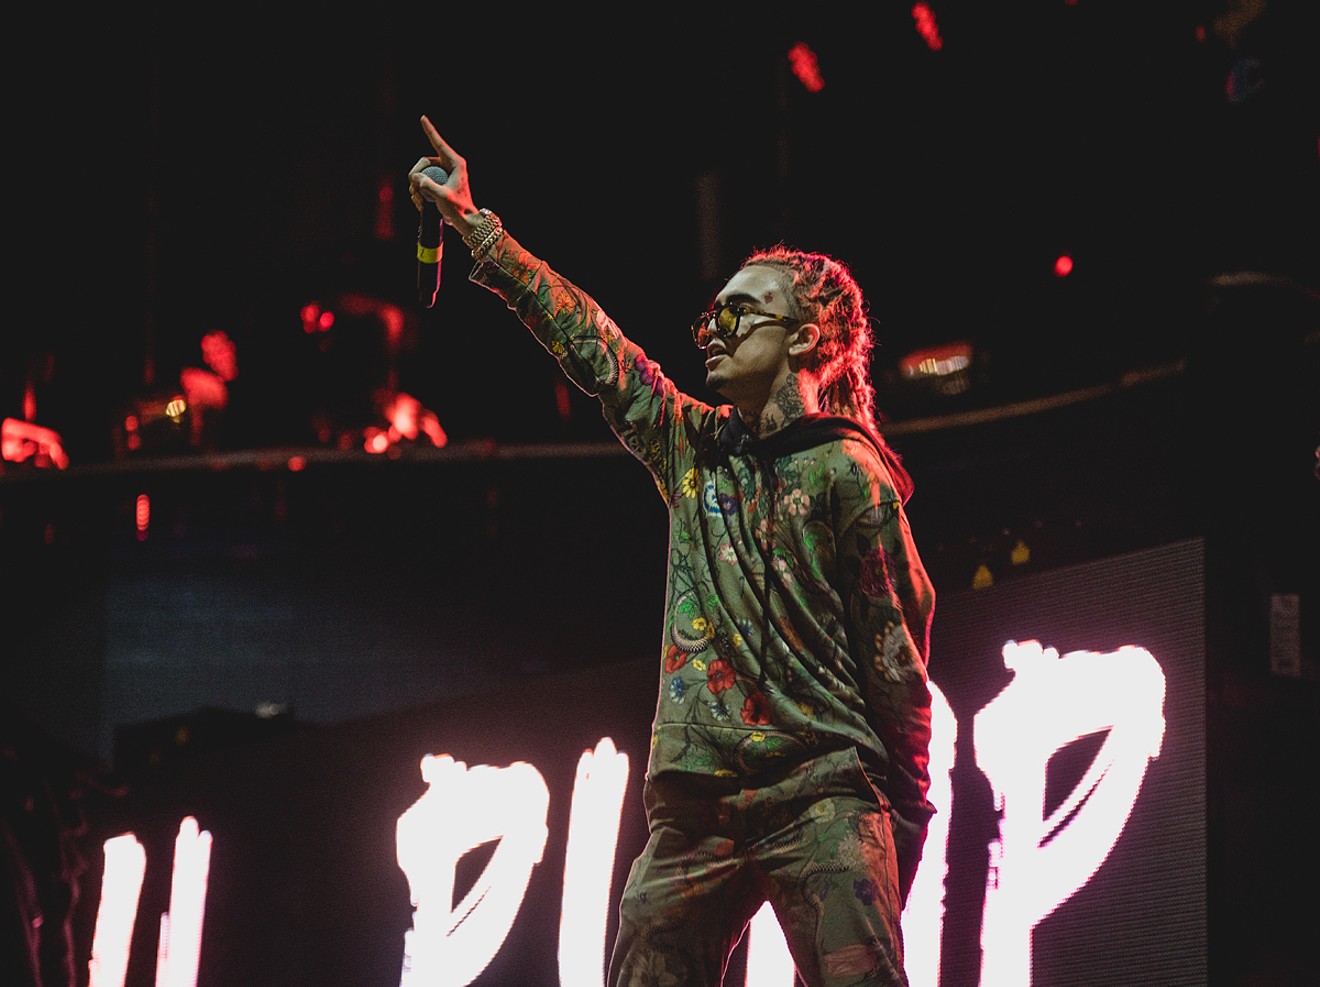 Lil Pump at Life in Color 2018. See more photos from Life in Color here.